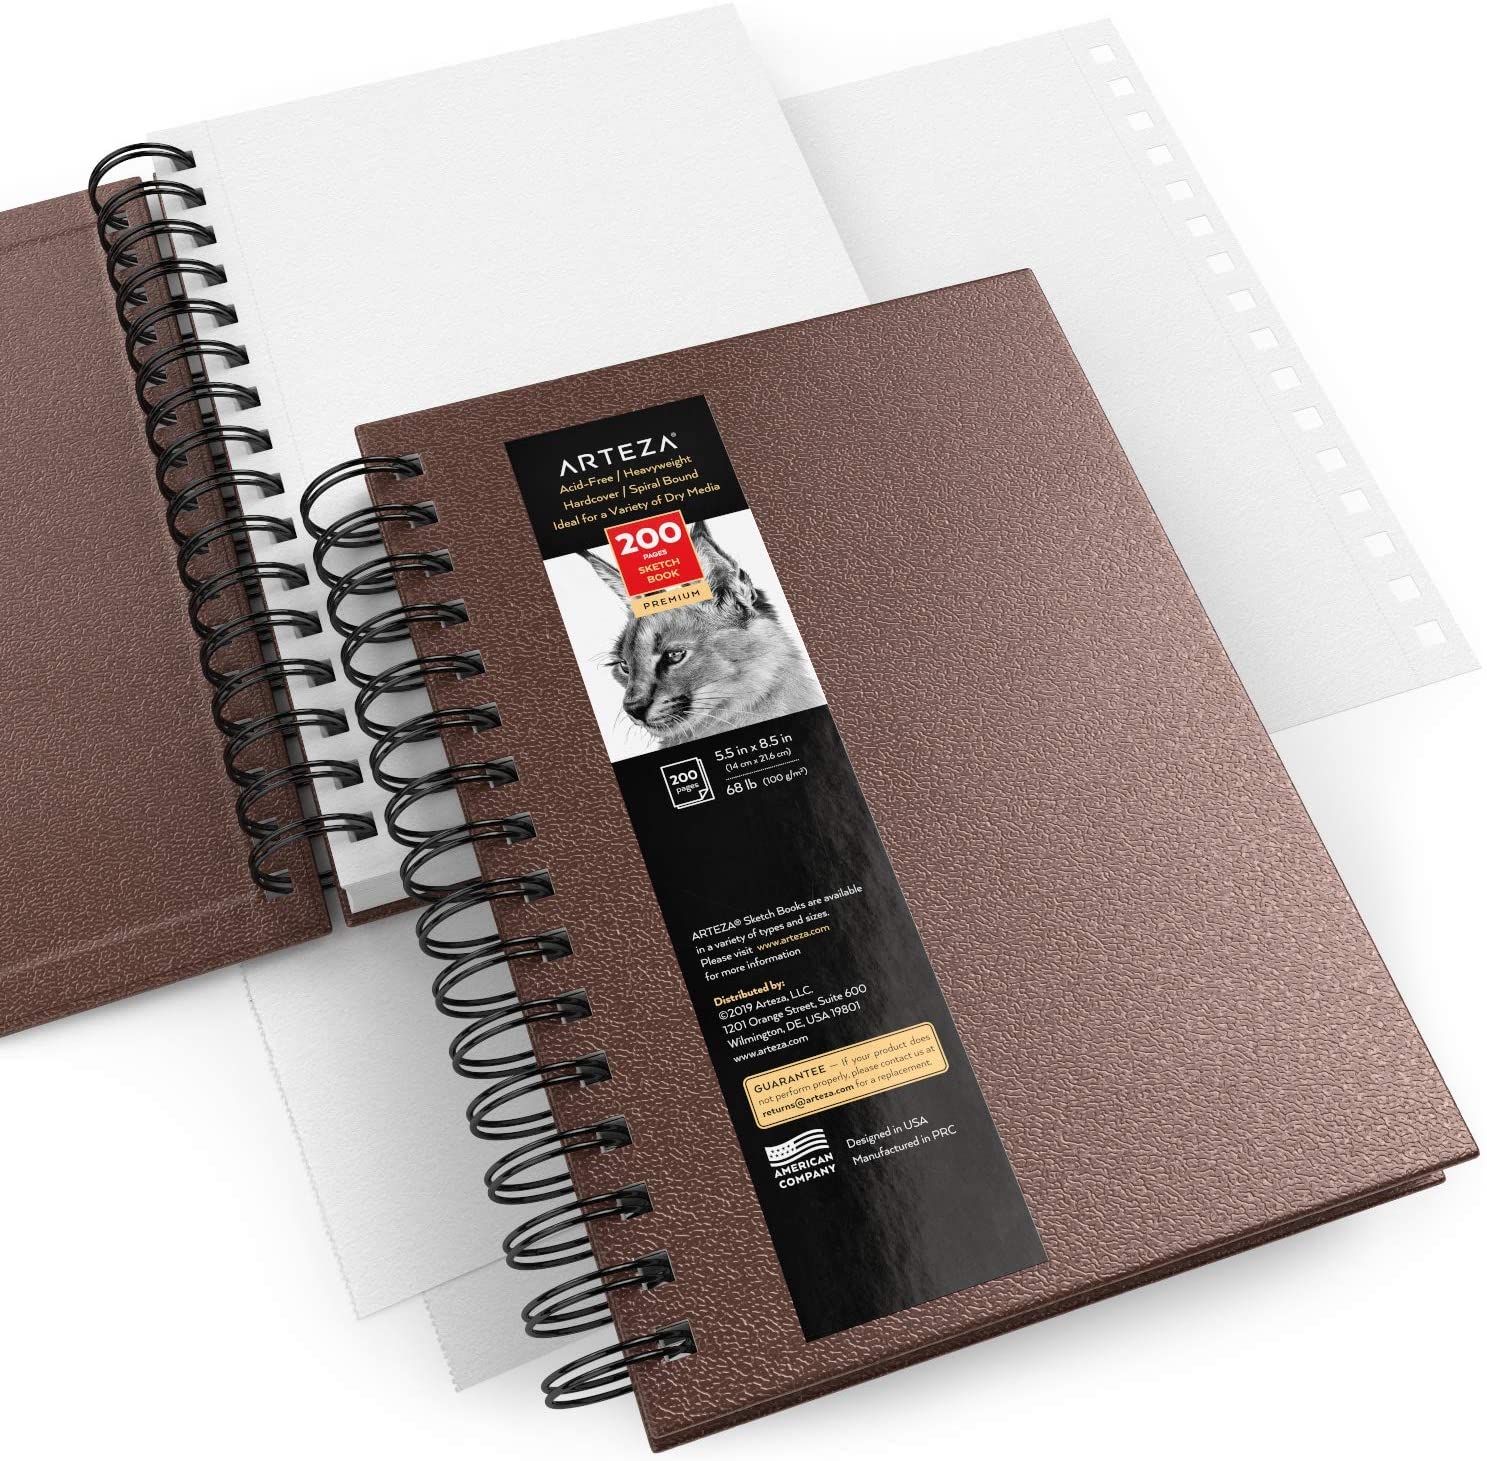  Sketch Book 5.5x8.5 Inch, Small Sketchbook, Pack of 2